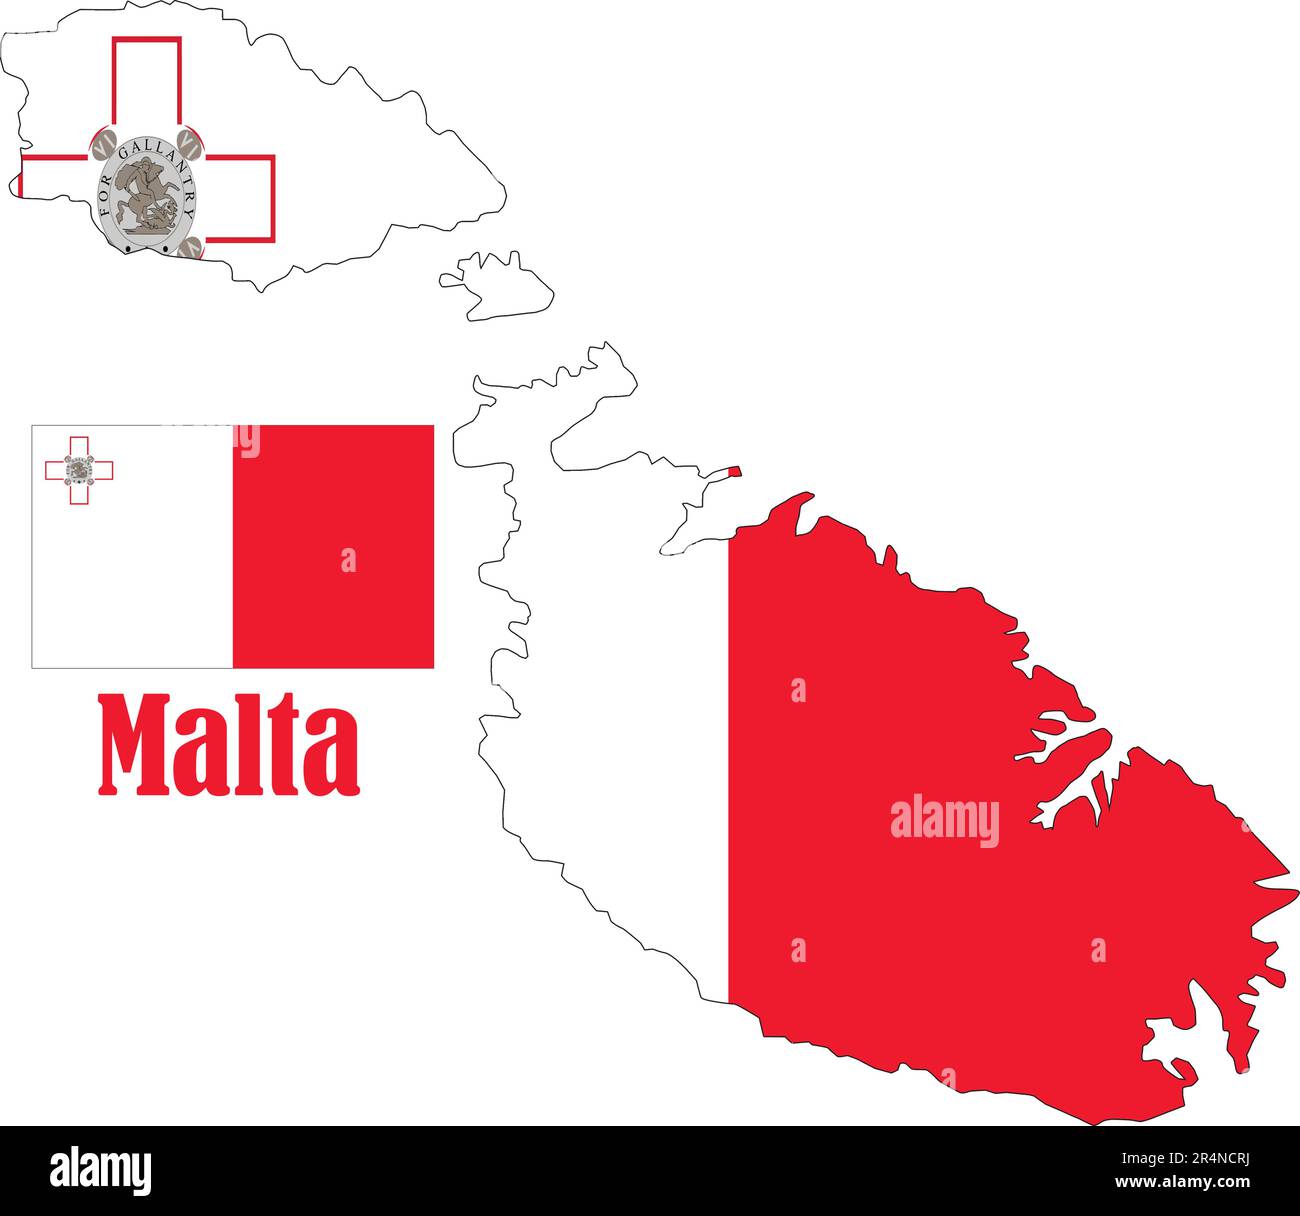 Malta Map and Flag Stock Vector